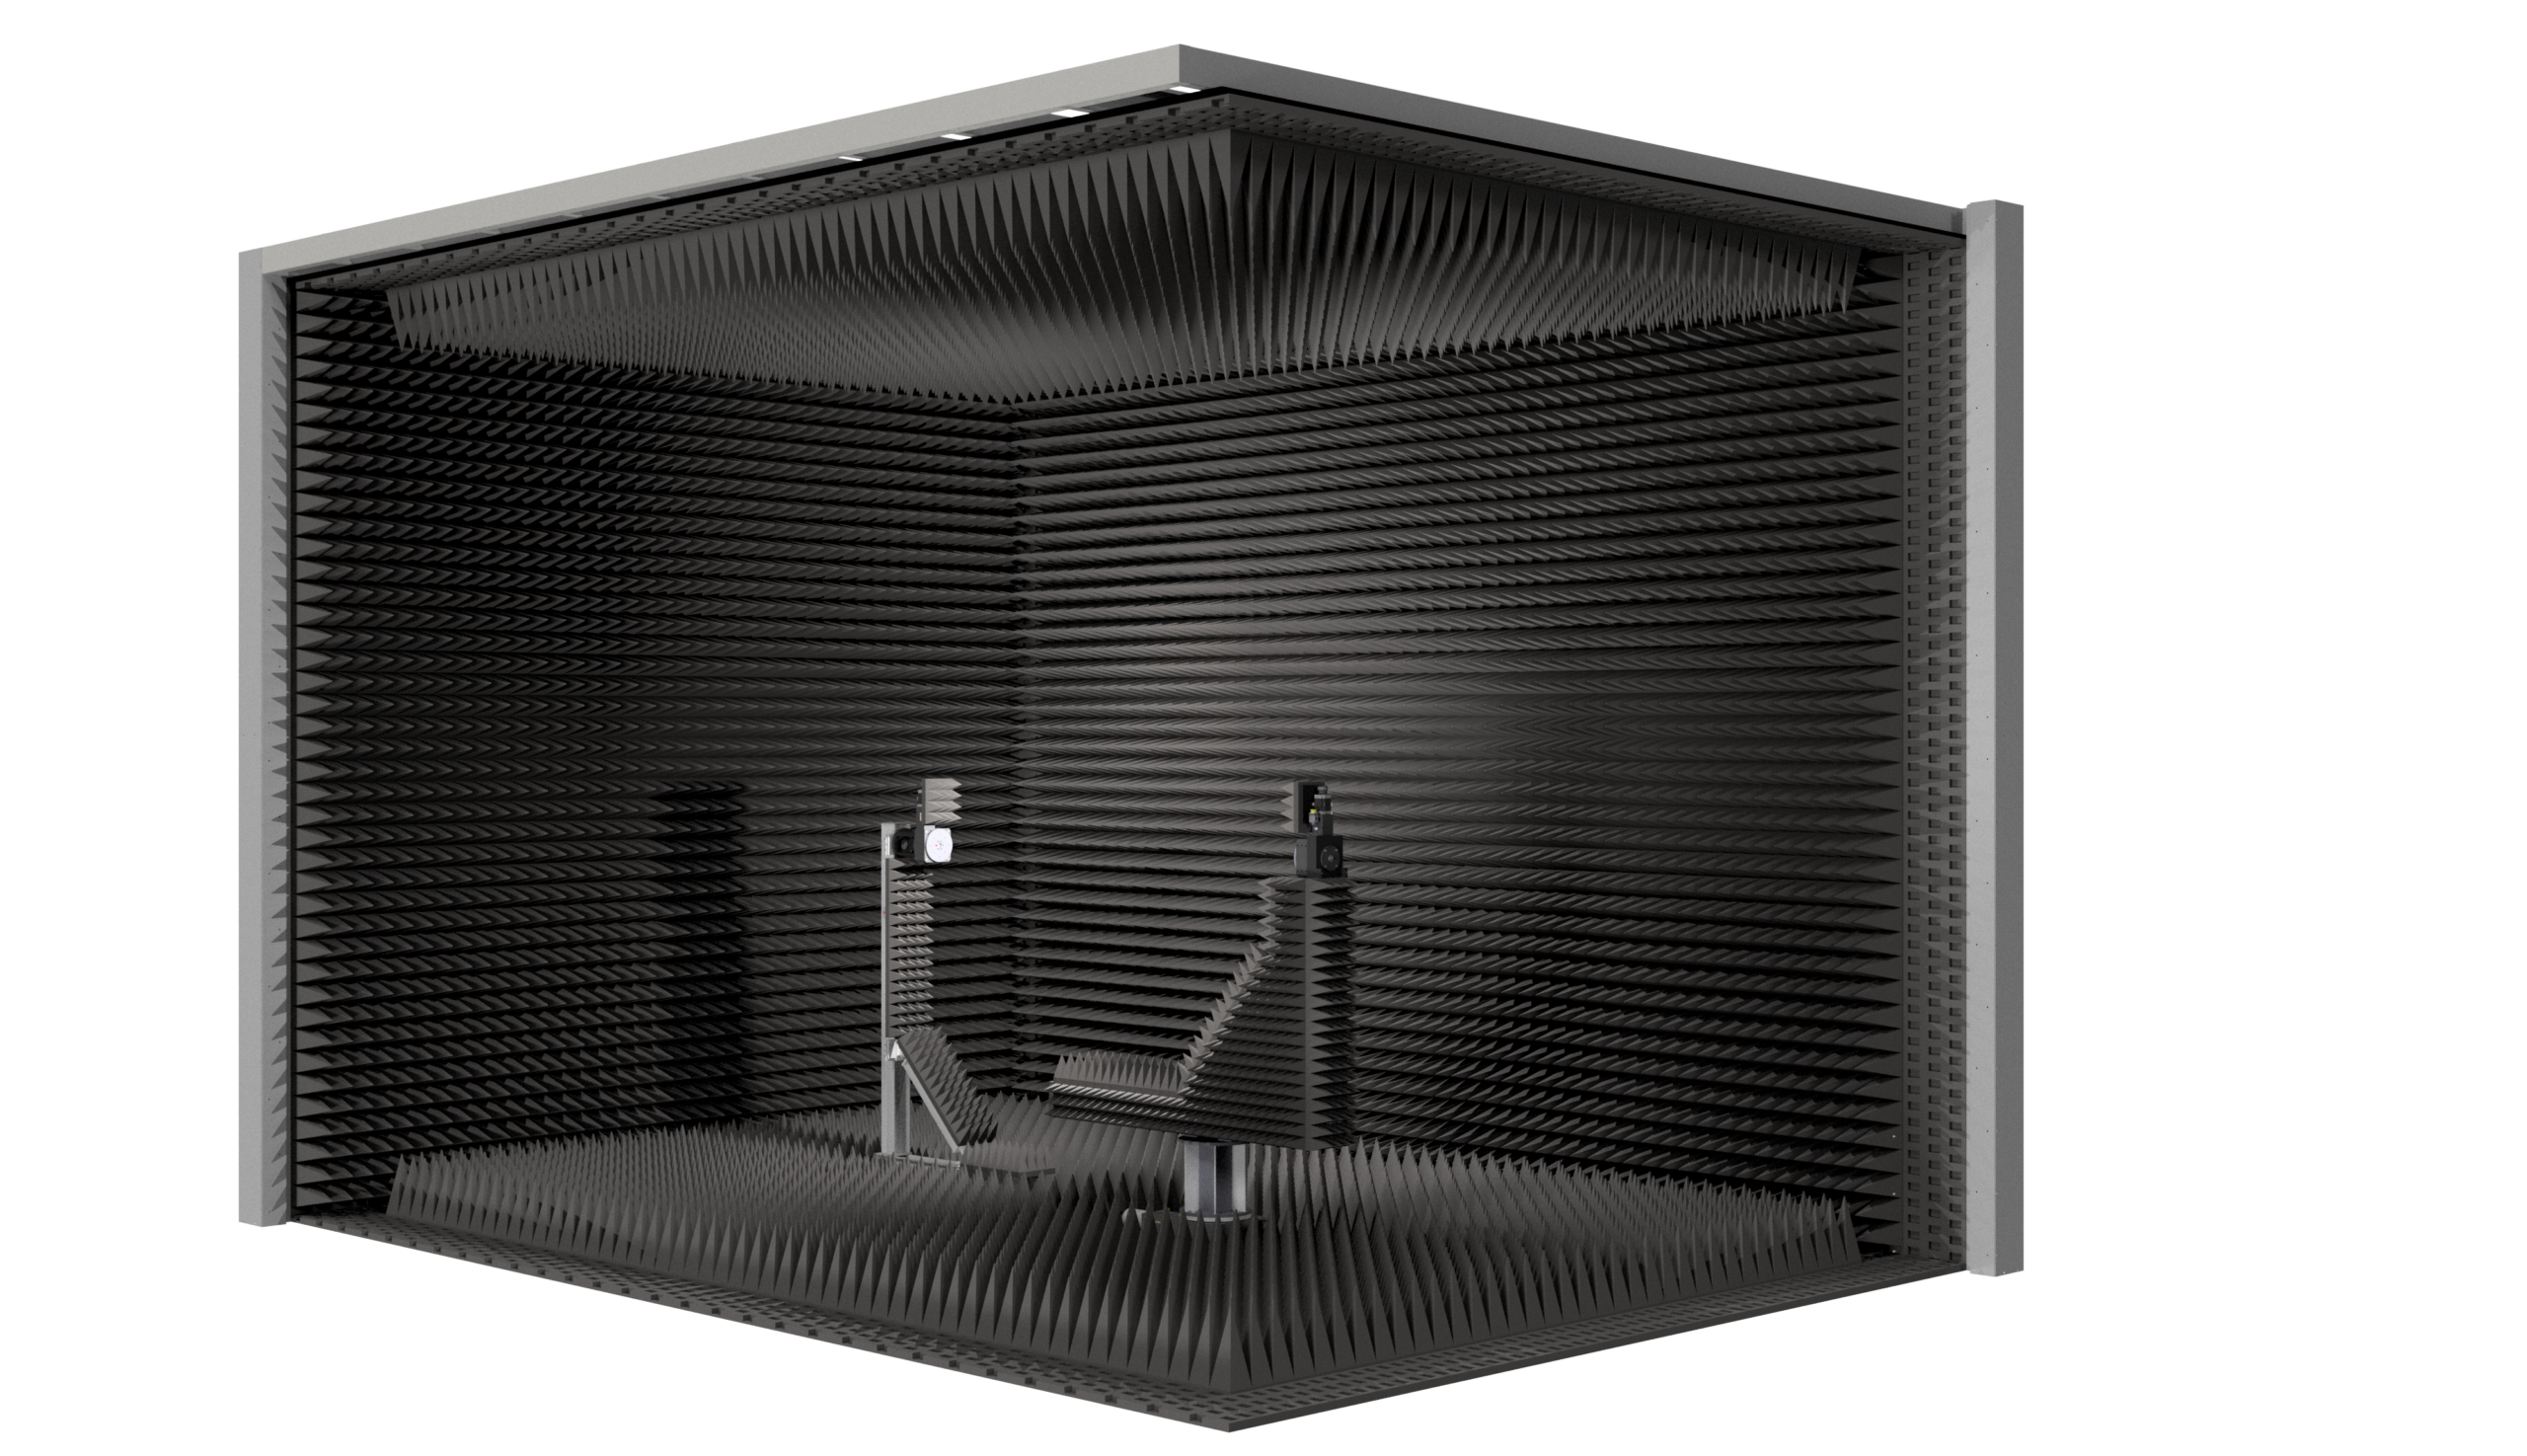 Rendered image of antenna test chamber including DMAS RF absorbers and SNF scanner.